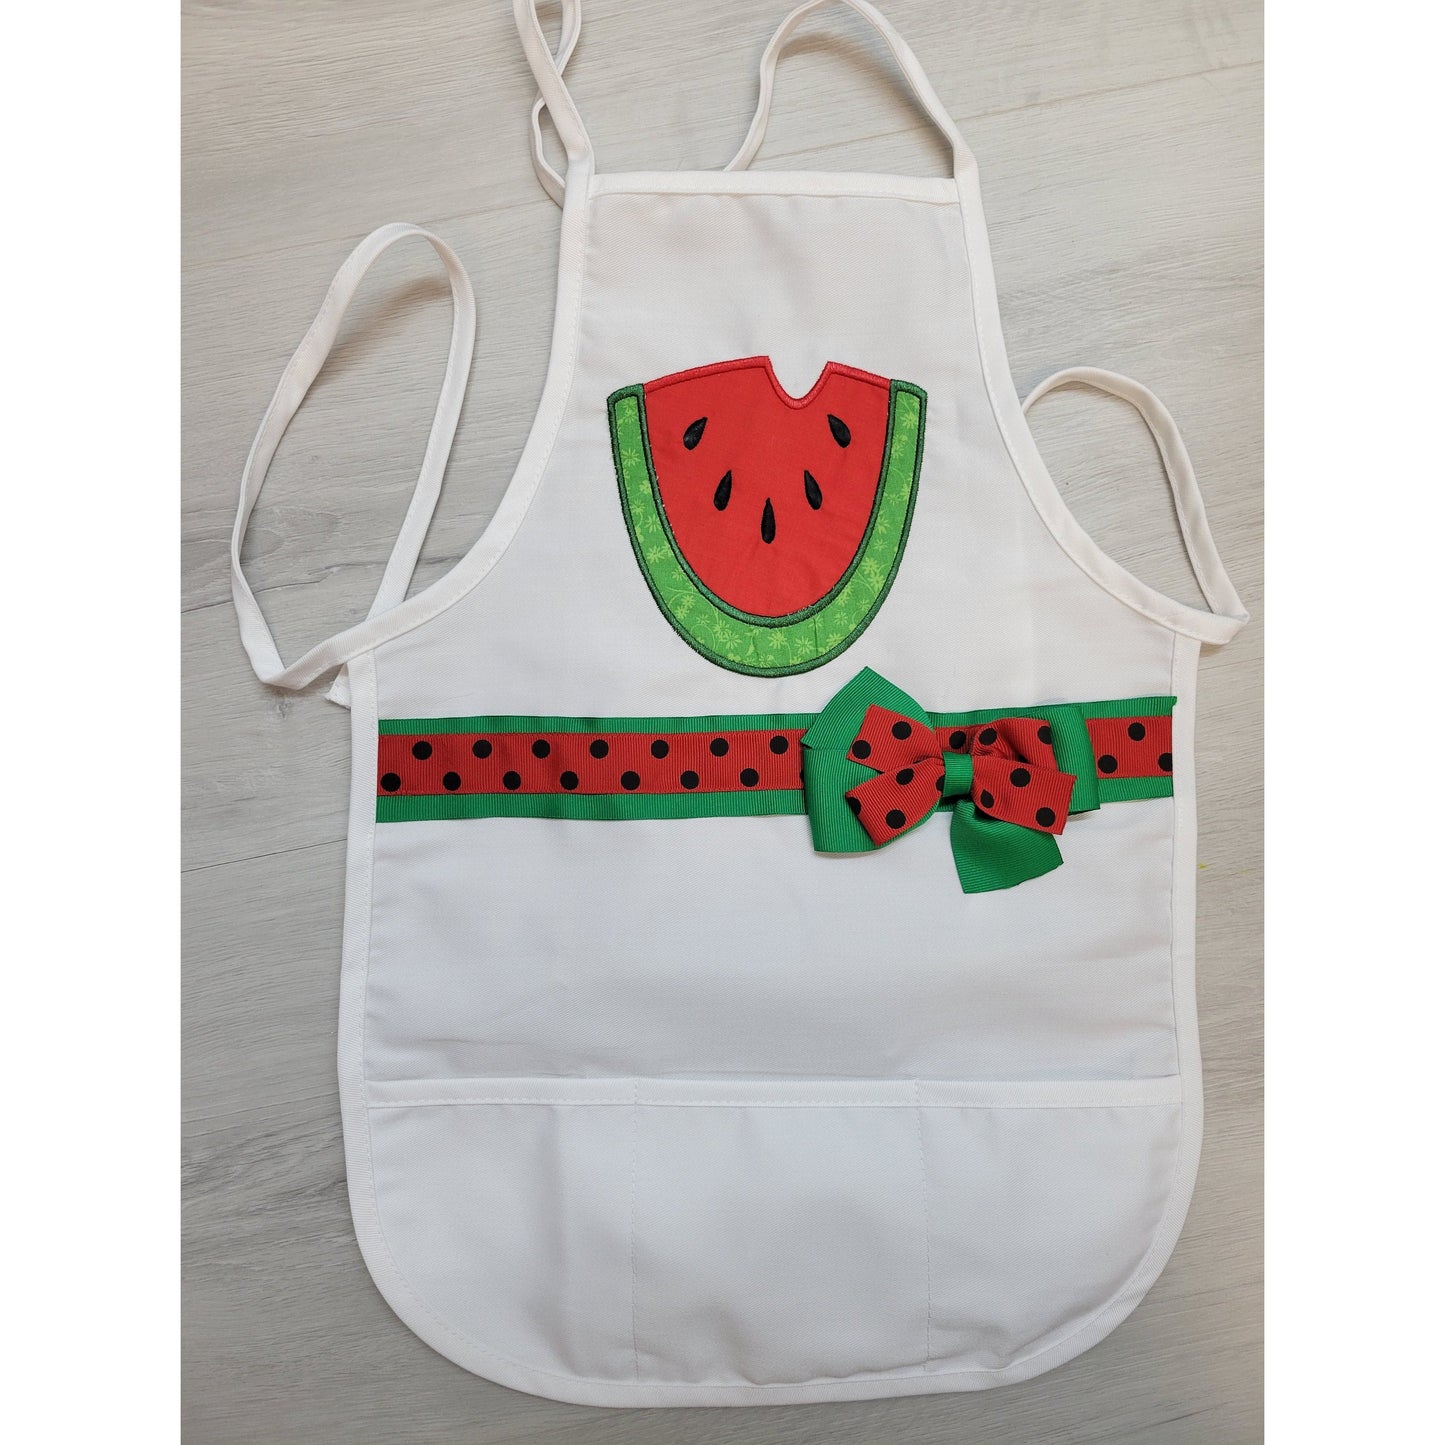 Kids Personalized Apron | Gifts For Kids | Child Chef Apron | Girls Watermelon Embroidered applique